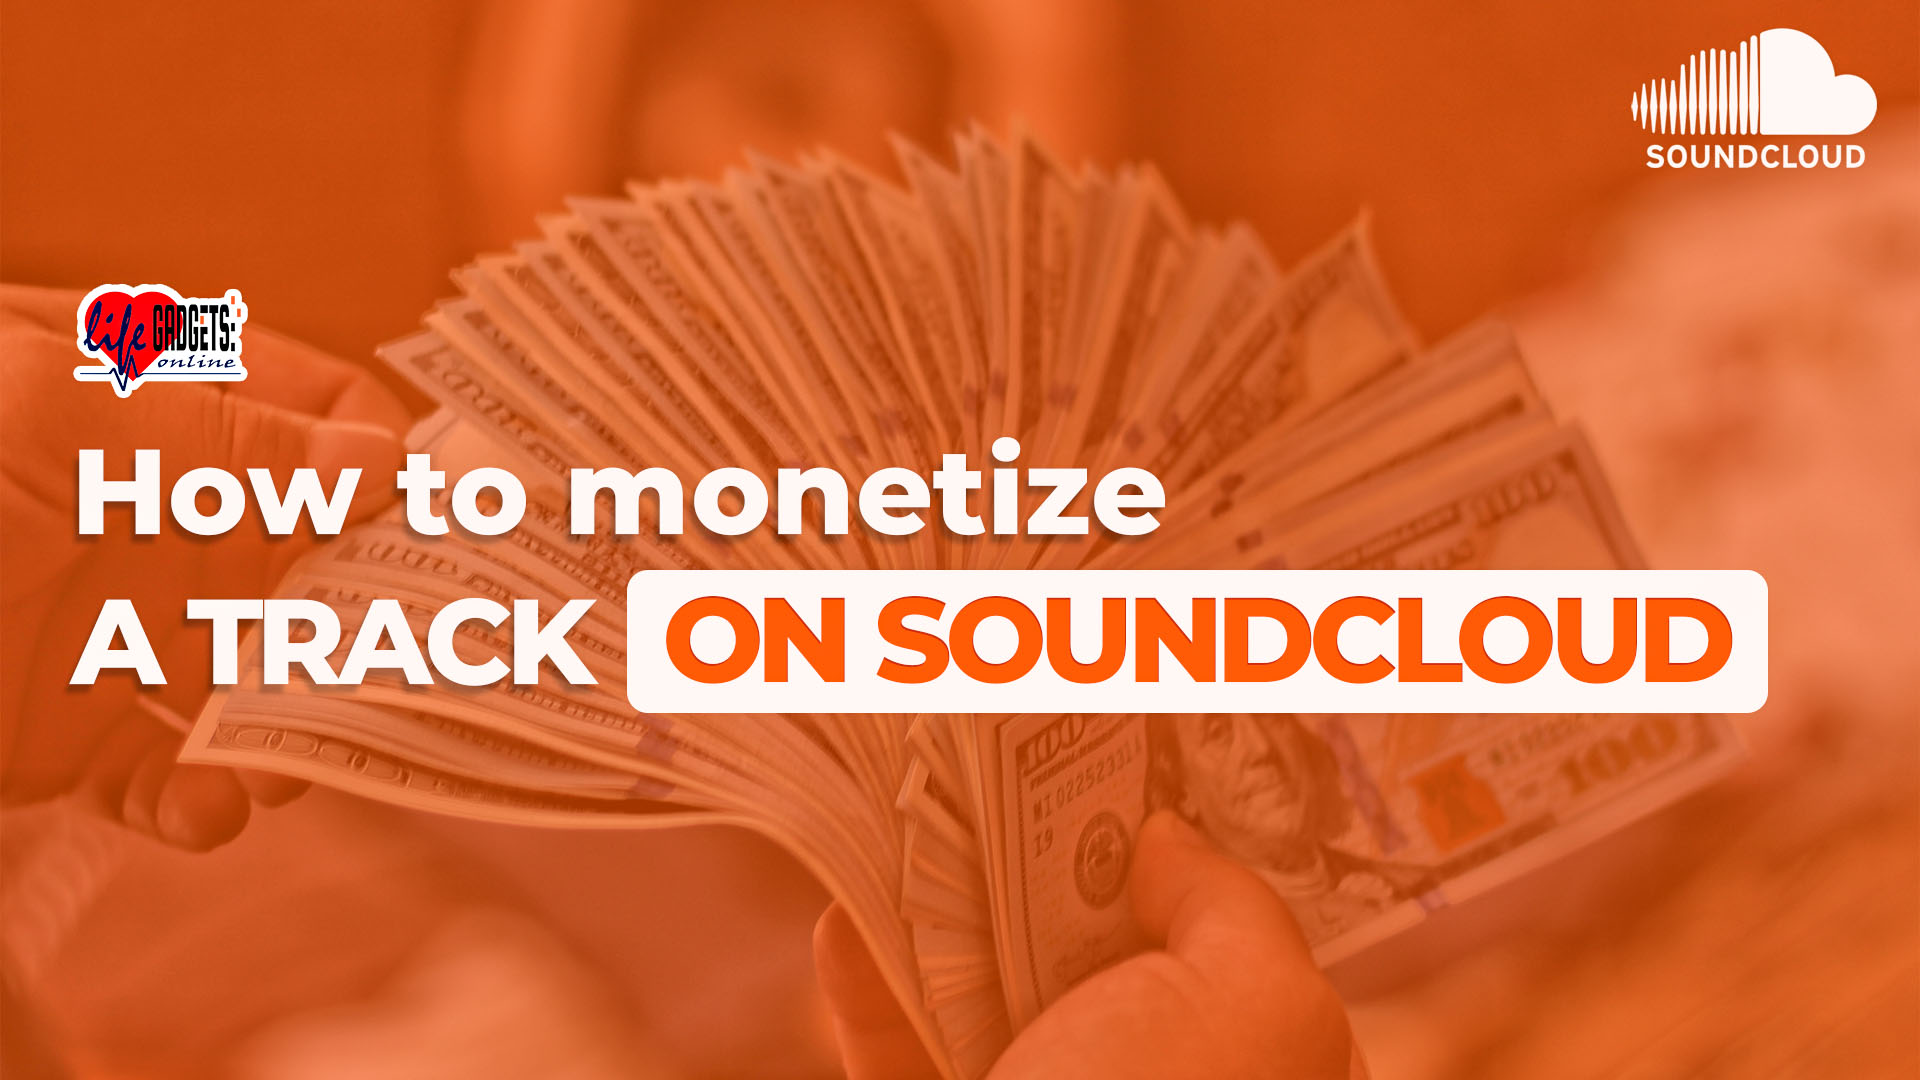 How to monetize a track on SoundCloud